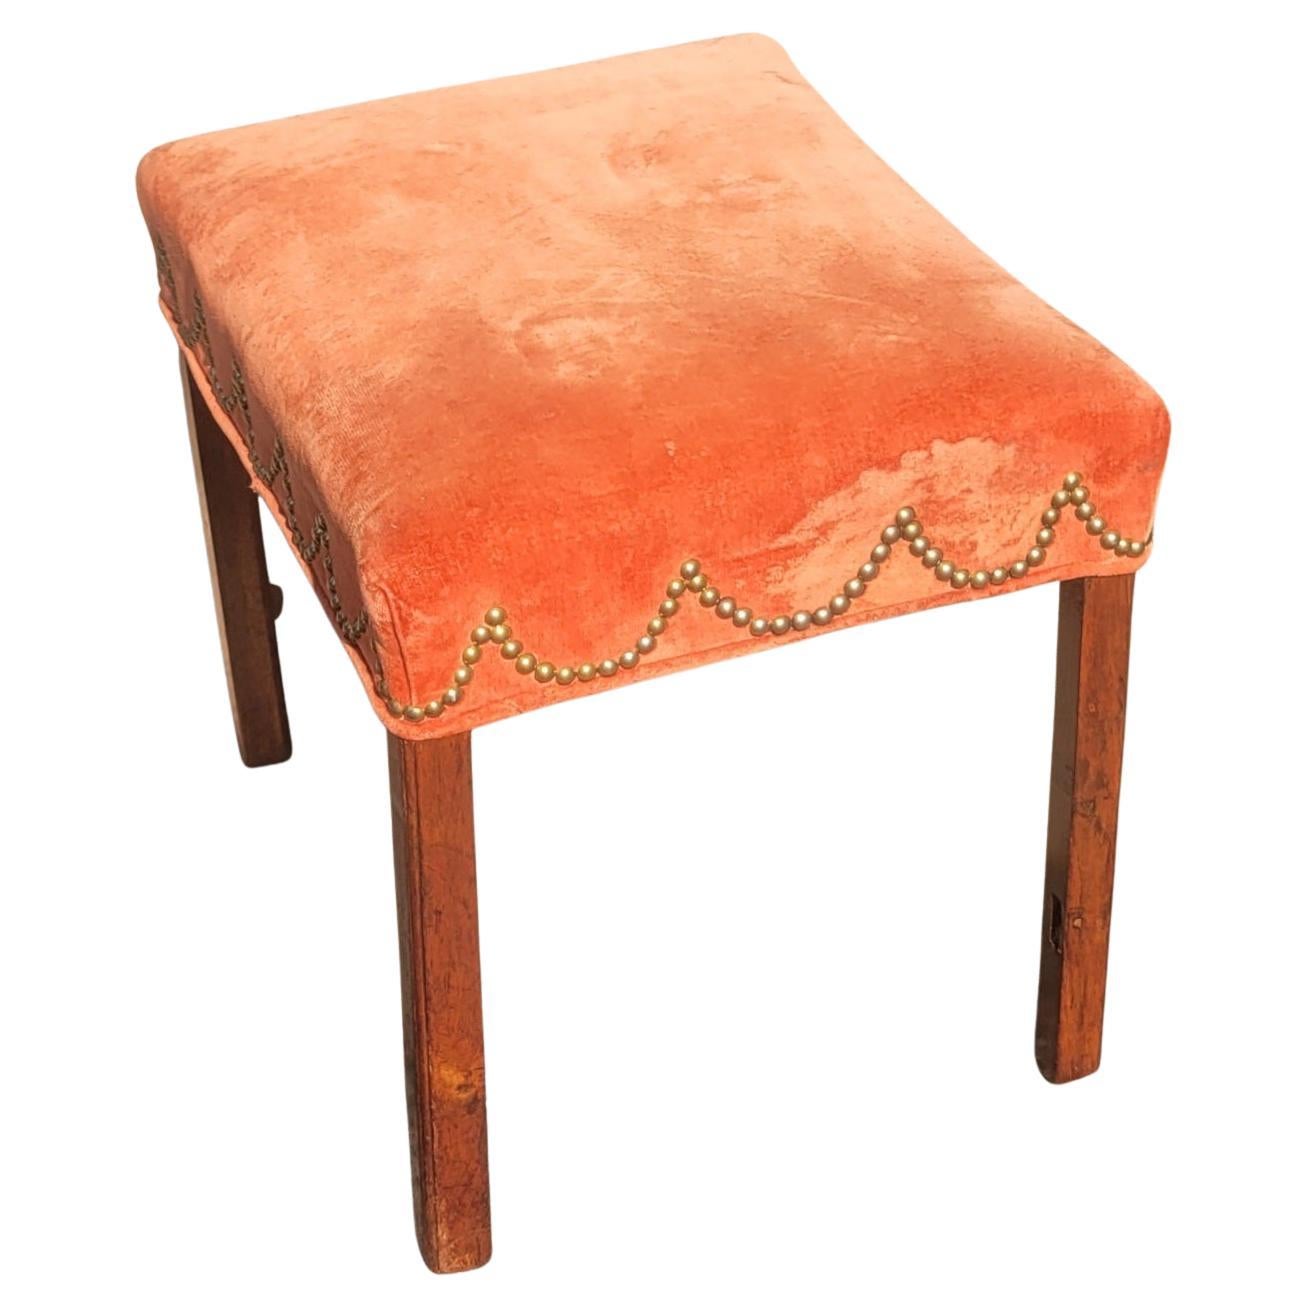 Early 20th C. Mahogany and Velvet Upholstered Stool with Nailhead Trims For Sale 2